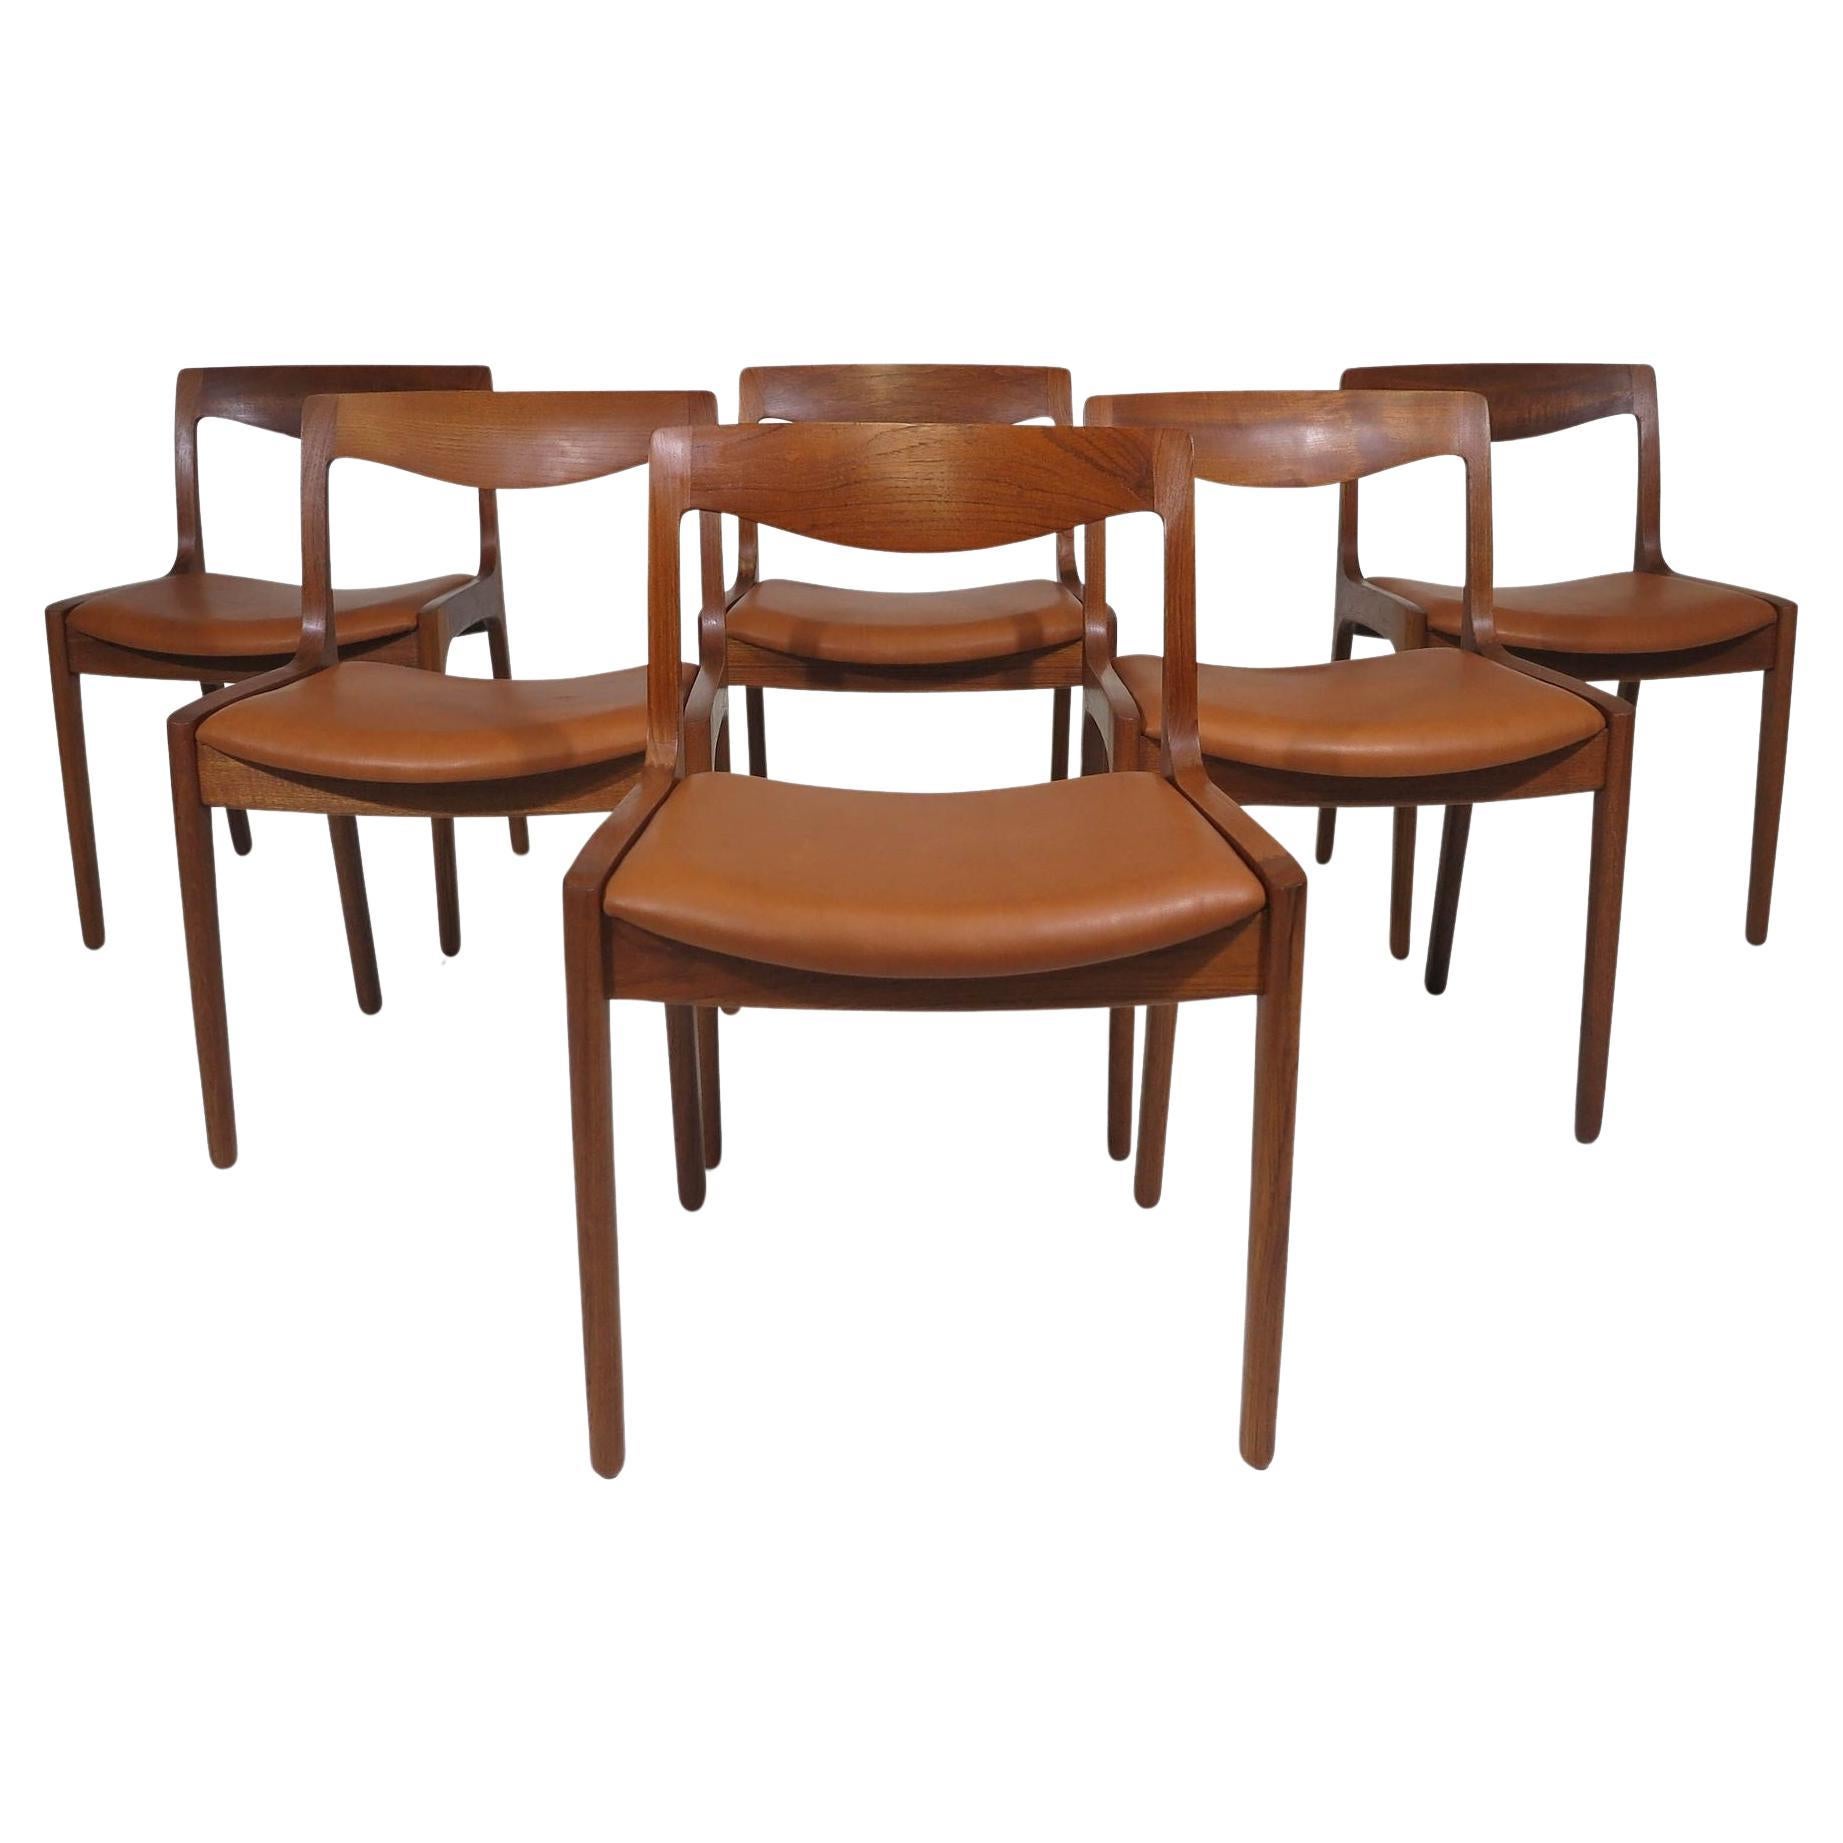 Poul Jeppesen Dining Room Chairs